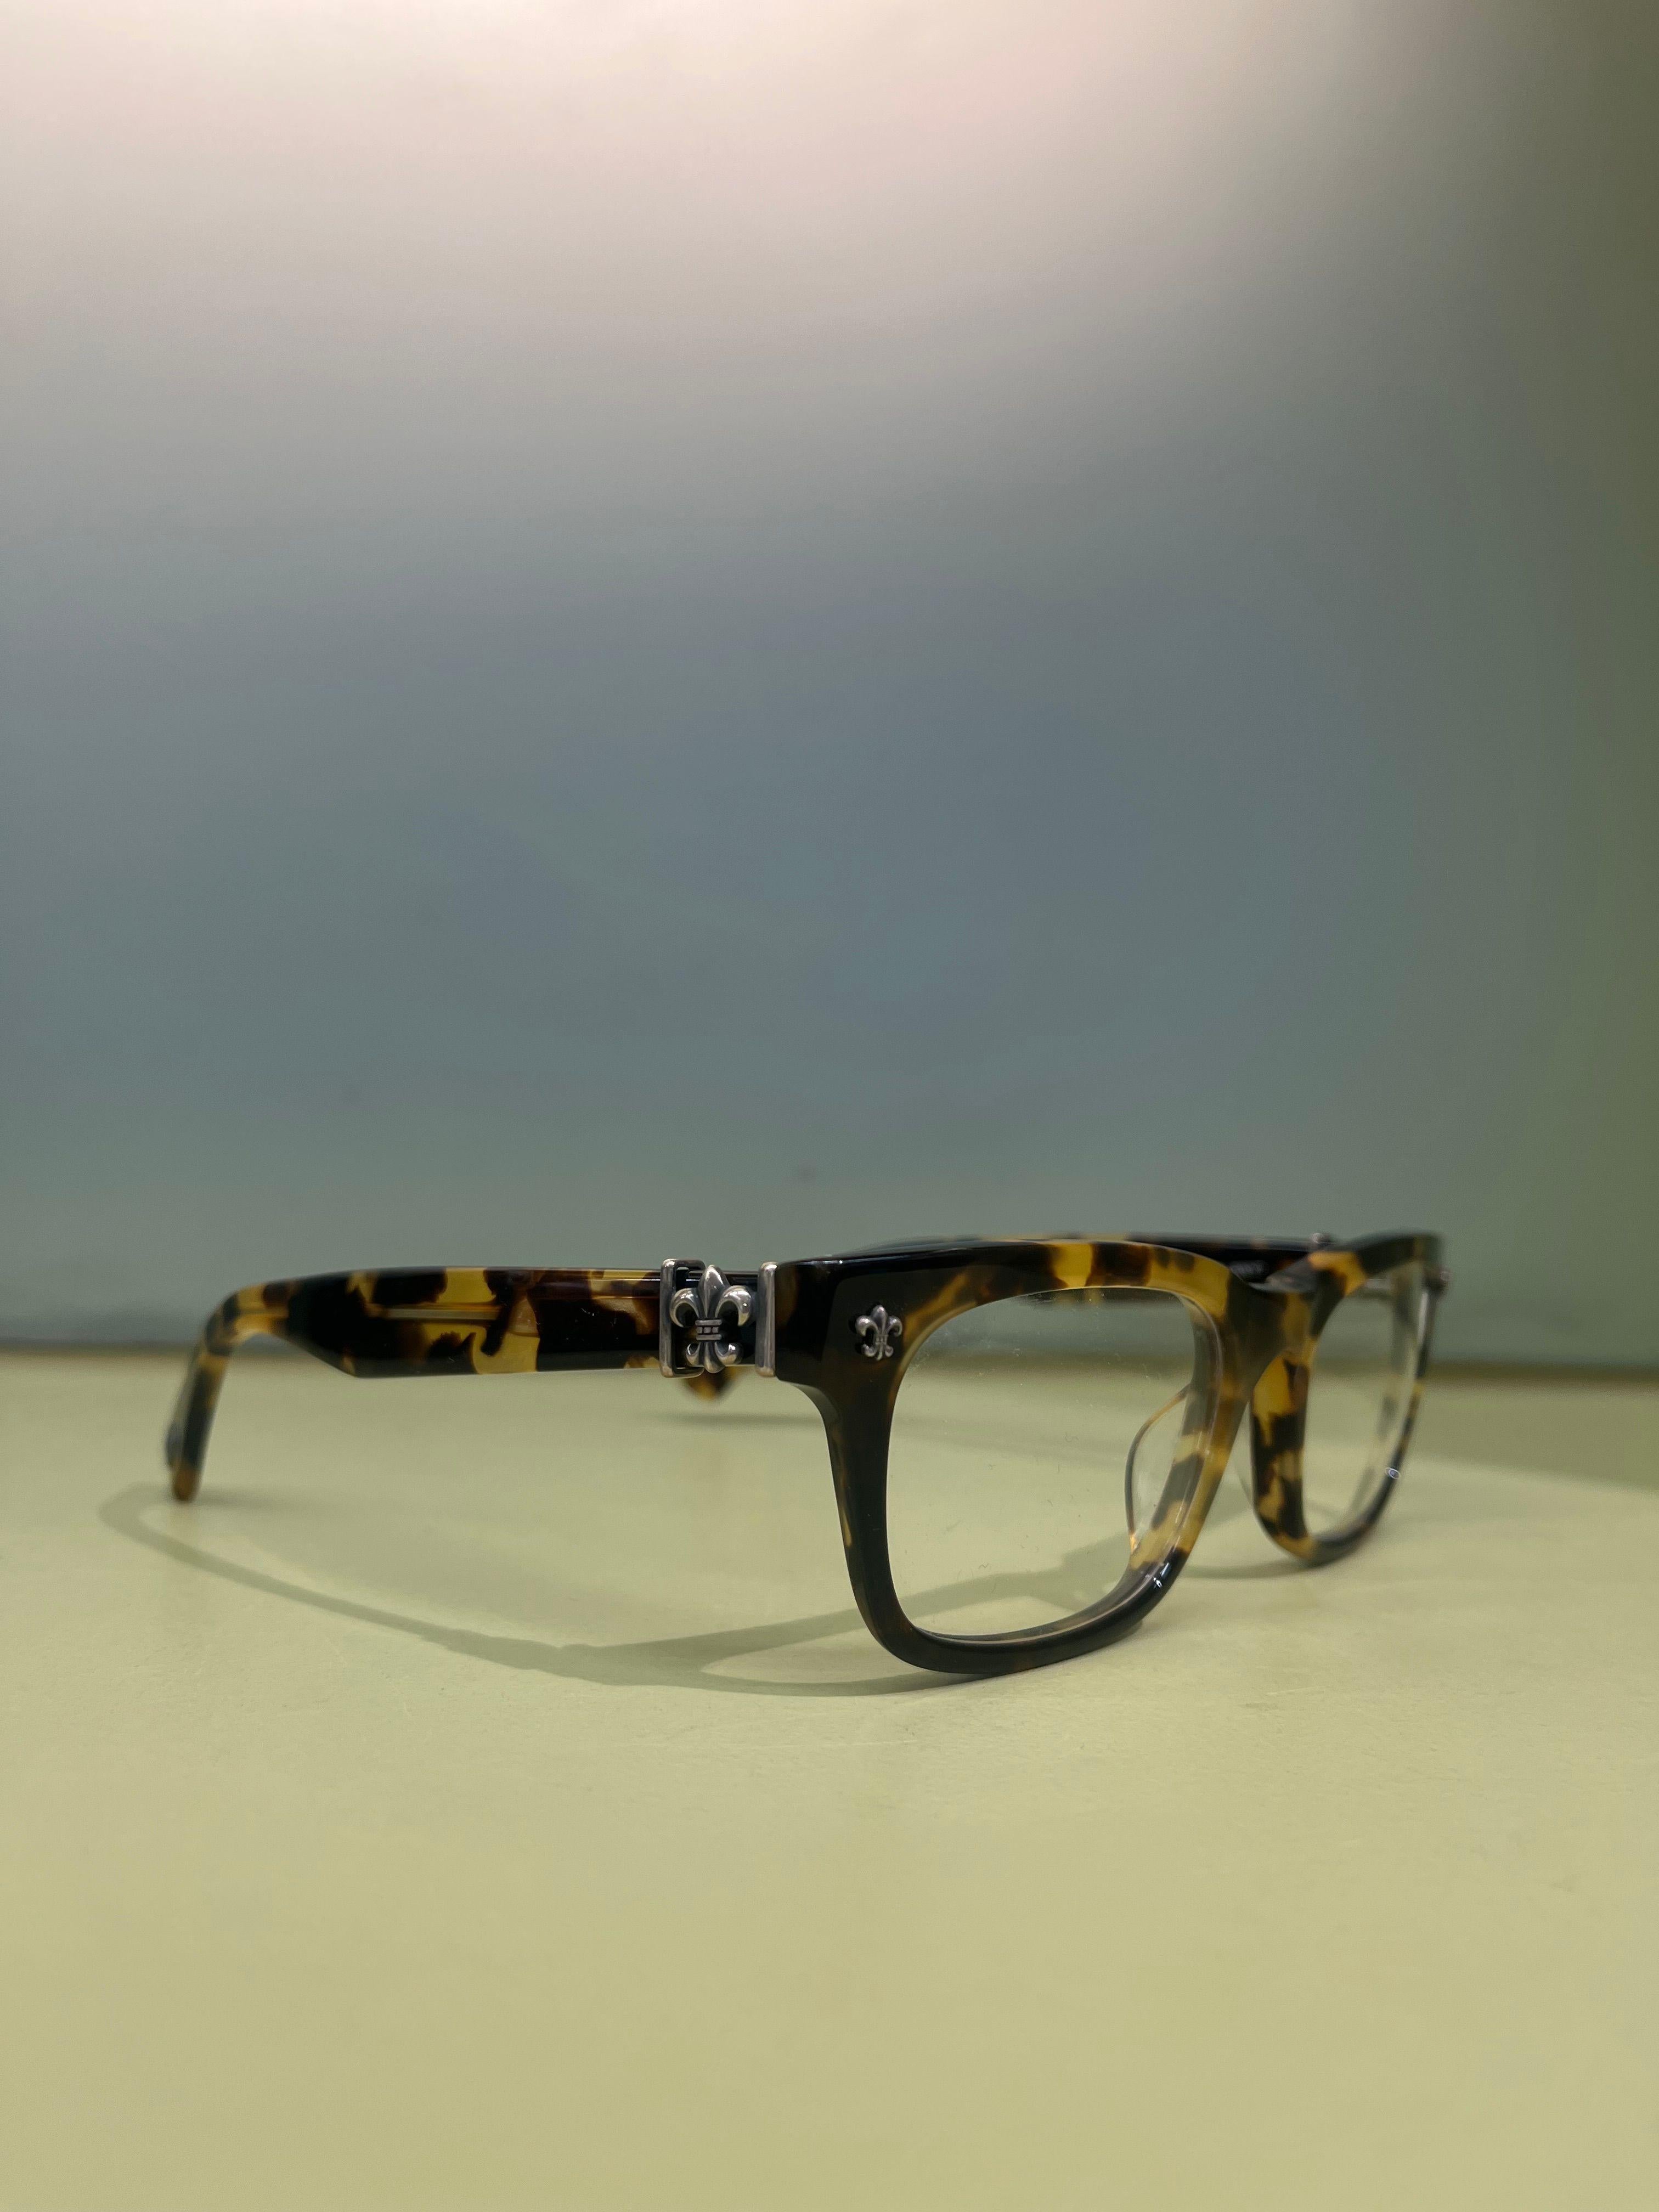 Chrome Hearts
Gittin' Any? Glasses

Beautiful Chrome Hearts Gittin Any glasses featuring a tortoise pattern. In new condition without flaws, never used.
